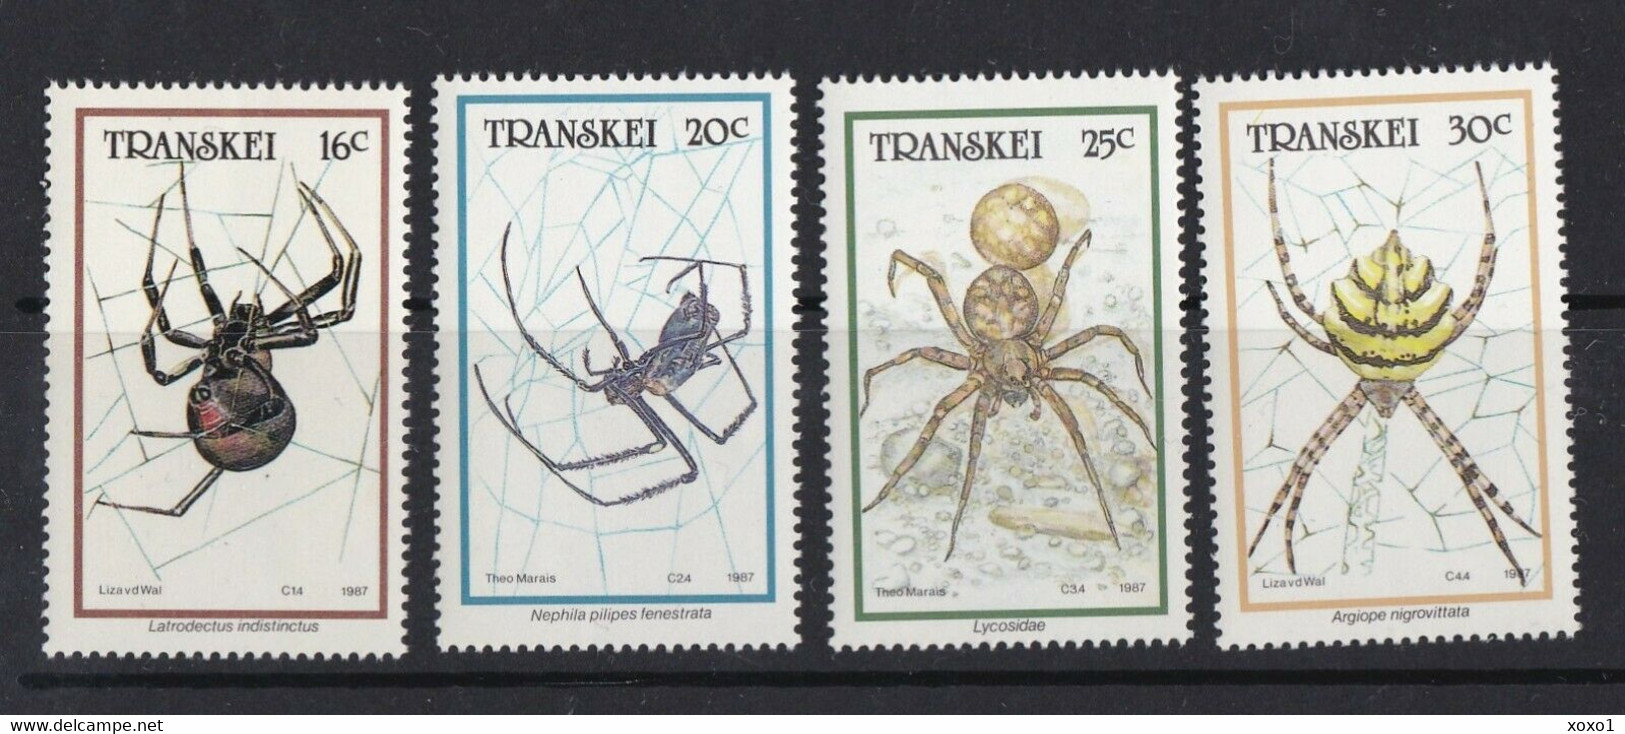 Transkei South Africa 1987  MiNr. 206 - 209 Spiders Insects 4v MNH**  3,50 € - Spiders